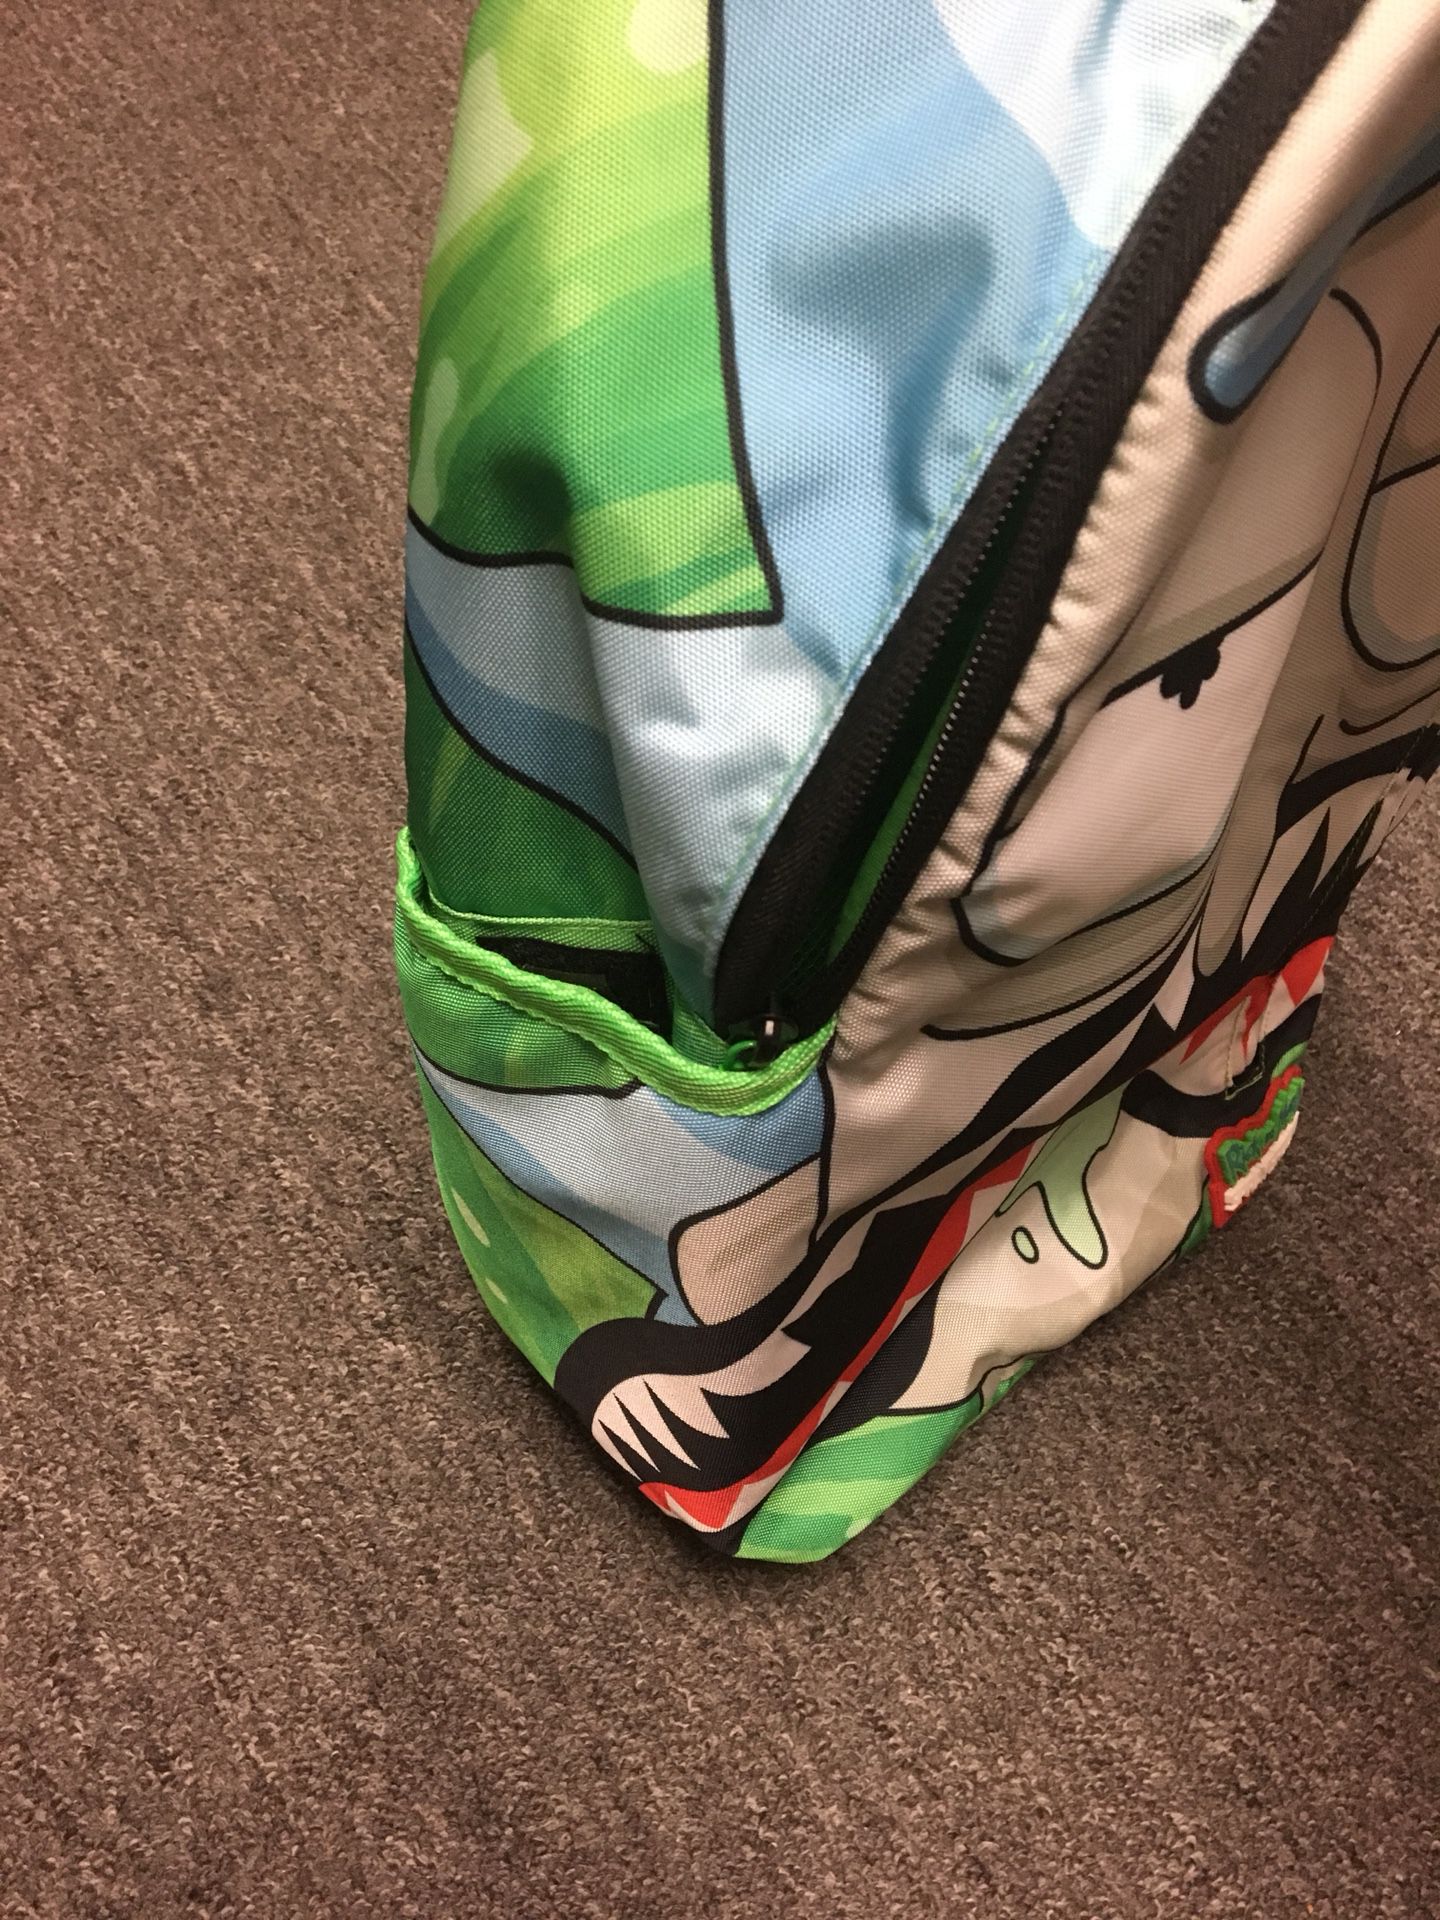 Sprayground x Louis Vuitton backpack for Sale in Philadelphia, PA - OfferUp